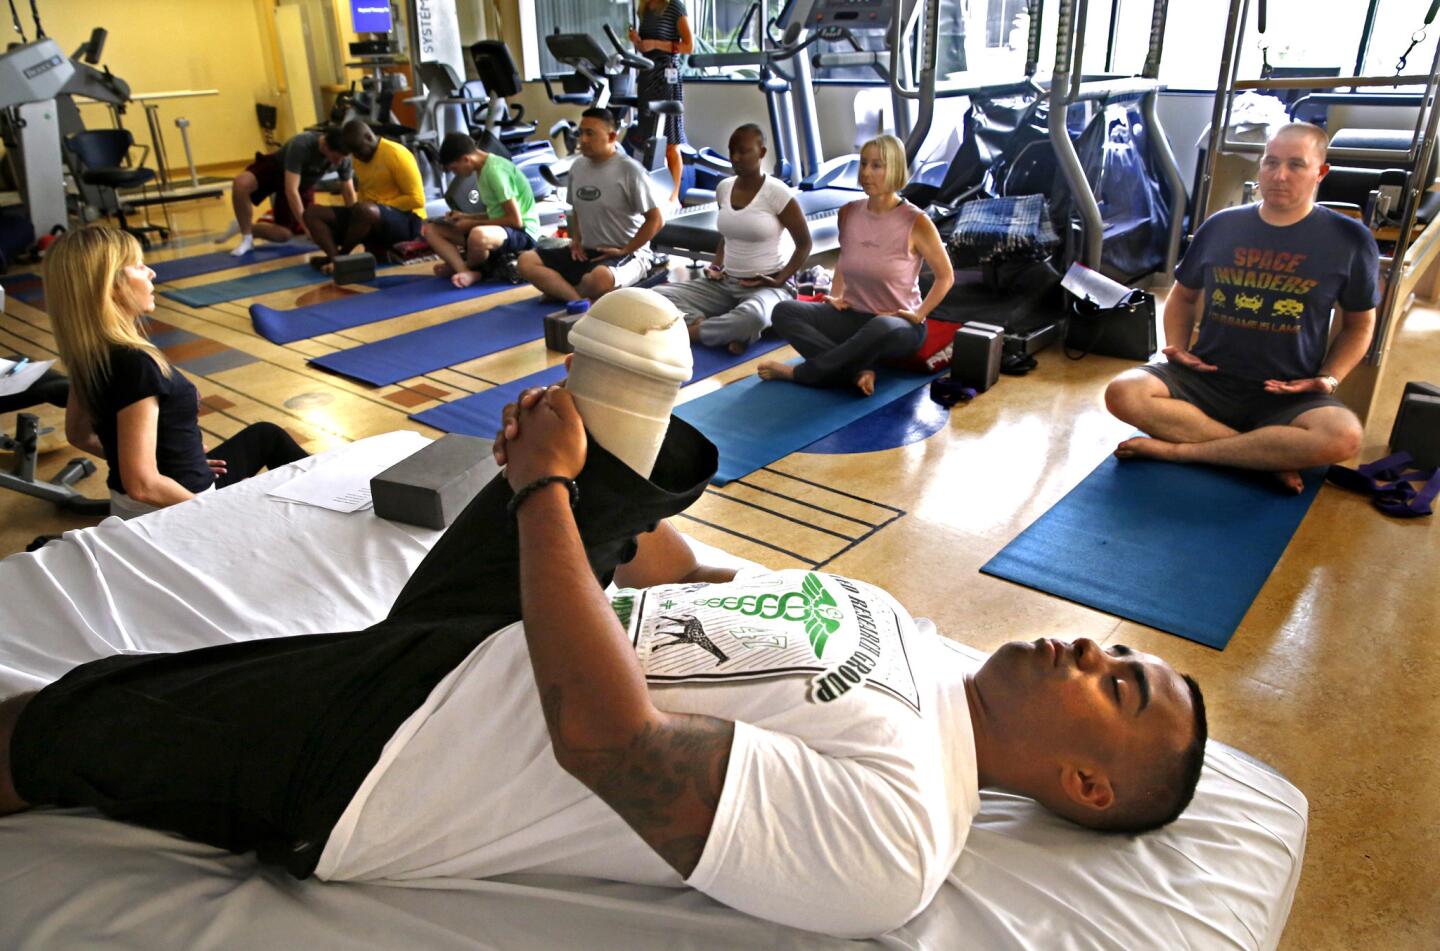 U.S. Marine Lance Cpl. Darryl Charles, 22, participates in a yoga class at the Naval Medical Center in San Diego, CA on June 10. He lost his right leg above the knee after he stepped on an IED in Afghanistan in October 2011. Other veterans with PTSD or traumatic brain injuries sit on the floor as instructor Barbara Lyon conducts the one-hour class designed to calm the mind, increase flexibility and improve physical strength.